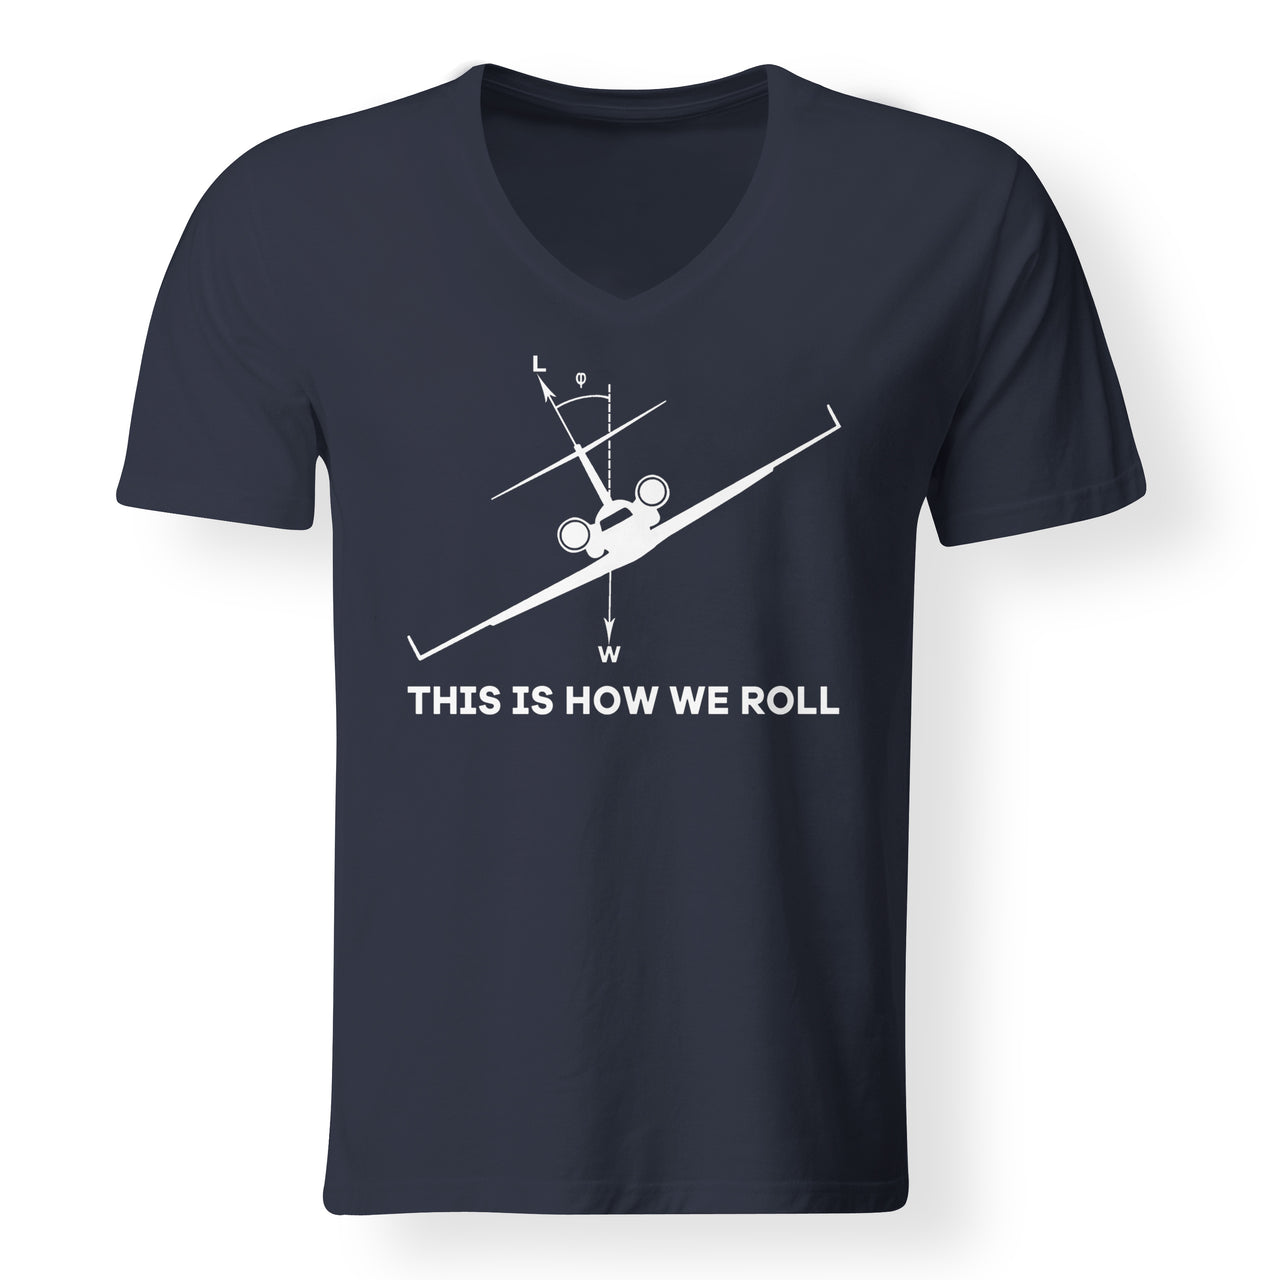 This is How We Roll Designed V-Neck T-Shirts